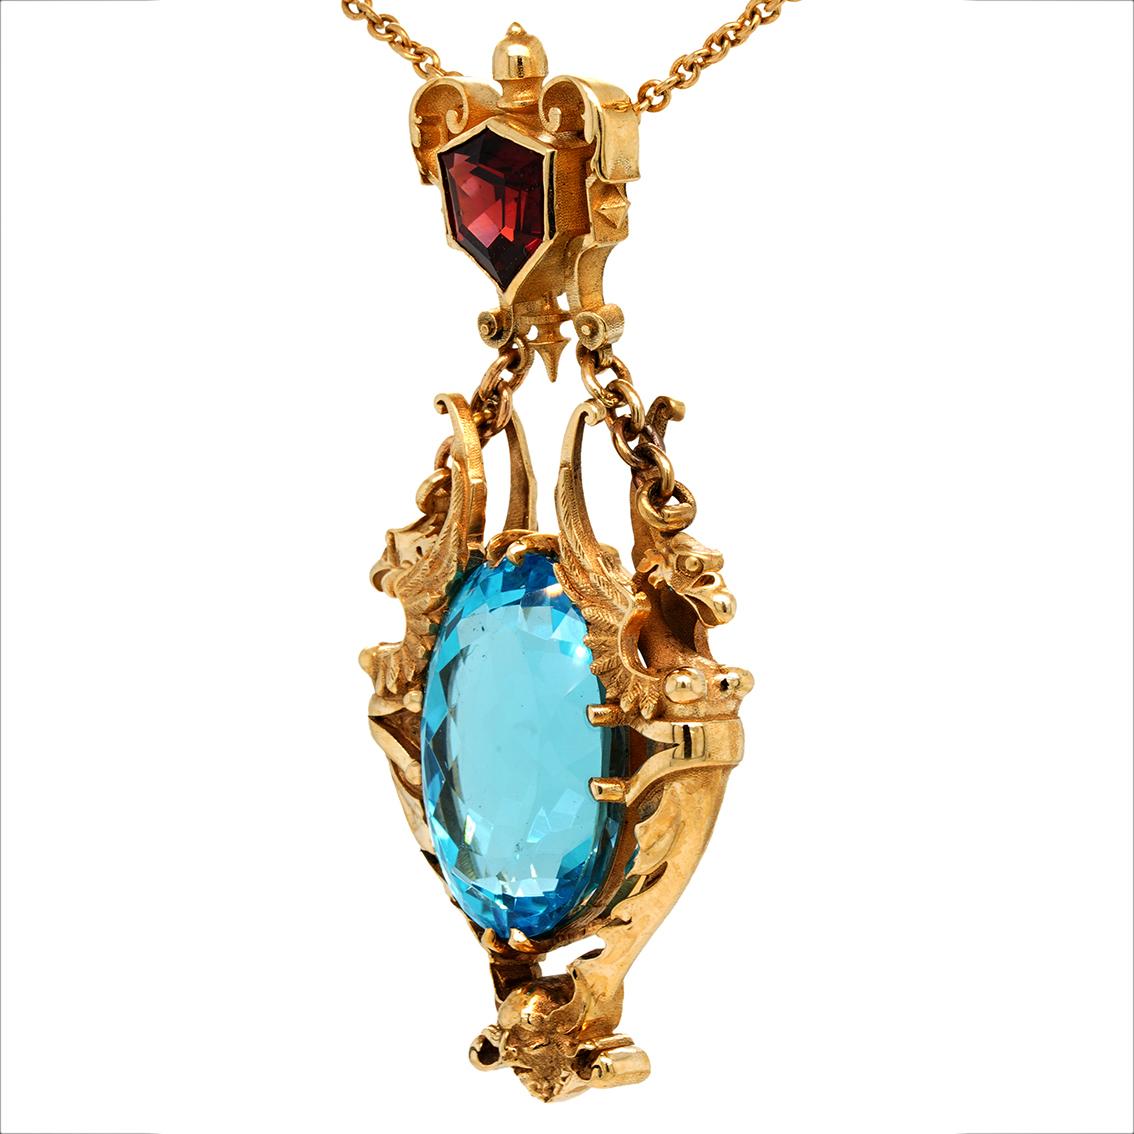 28ct Oval Swiss Blue Topaz, Garnet 9k Yellow Gold Antique Style Pendant Necklace For Sale 2